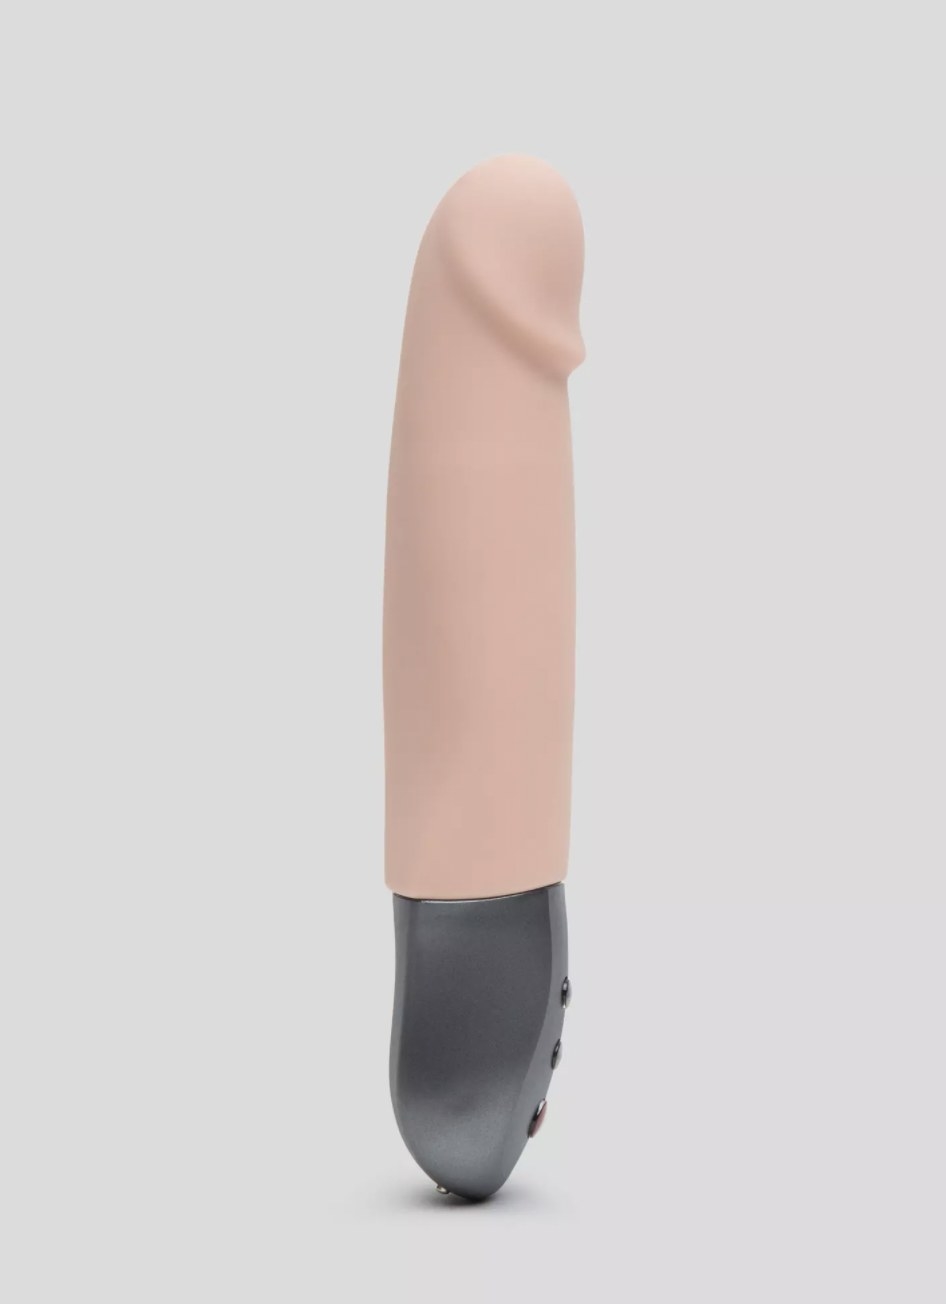 The pink, light-skin colored thrusting vibrator